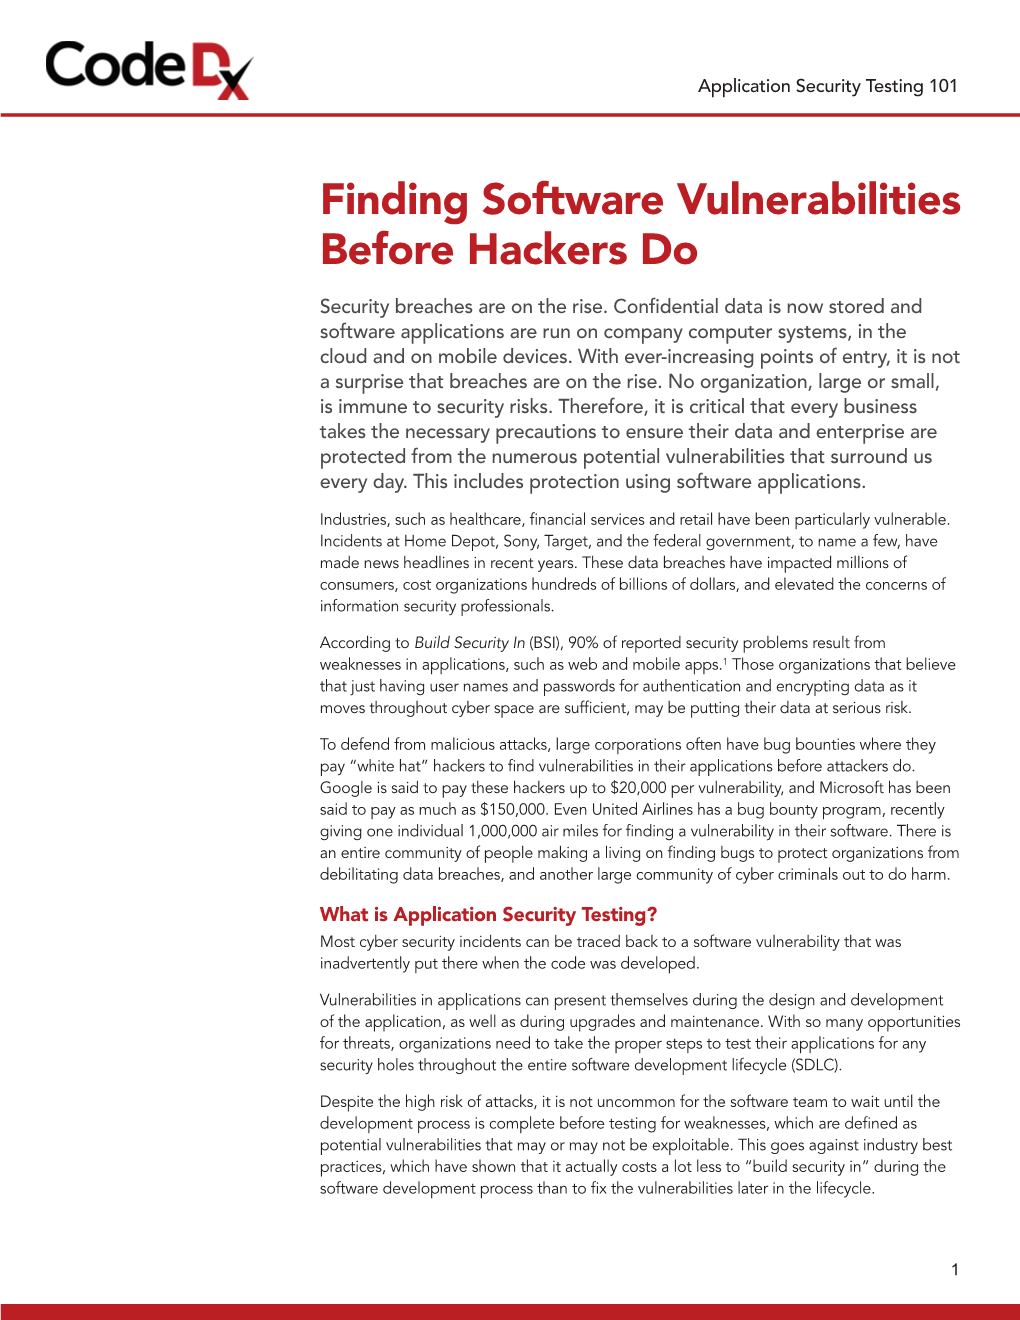 Finding Software Vulnerabilities Before Hackers Do Security Breaches Are on the Rise